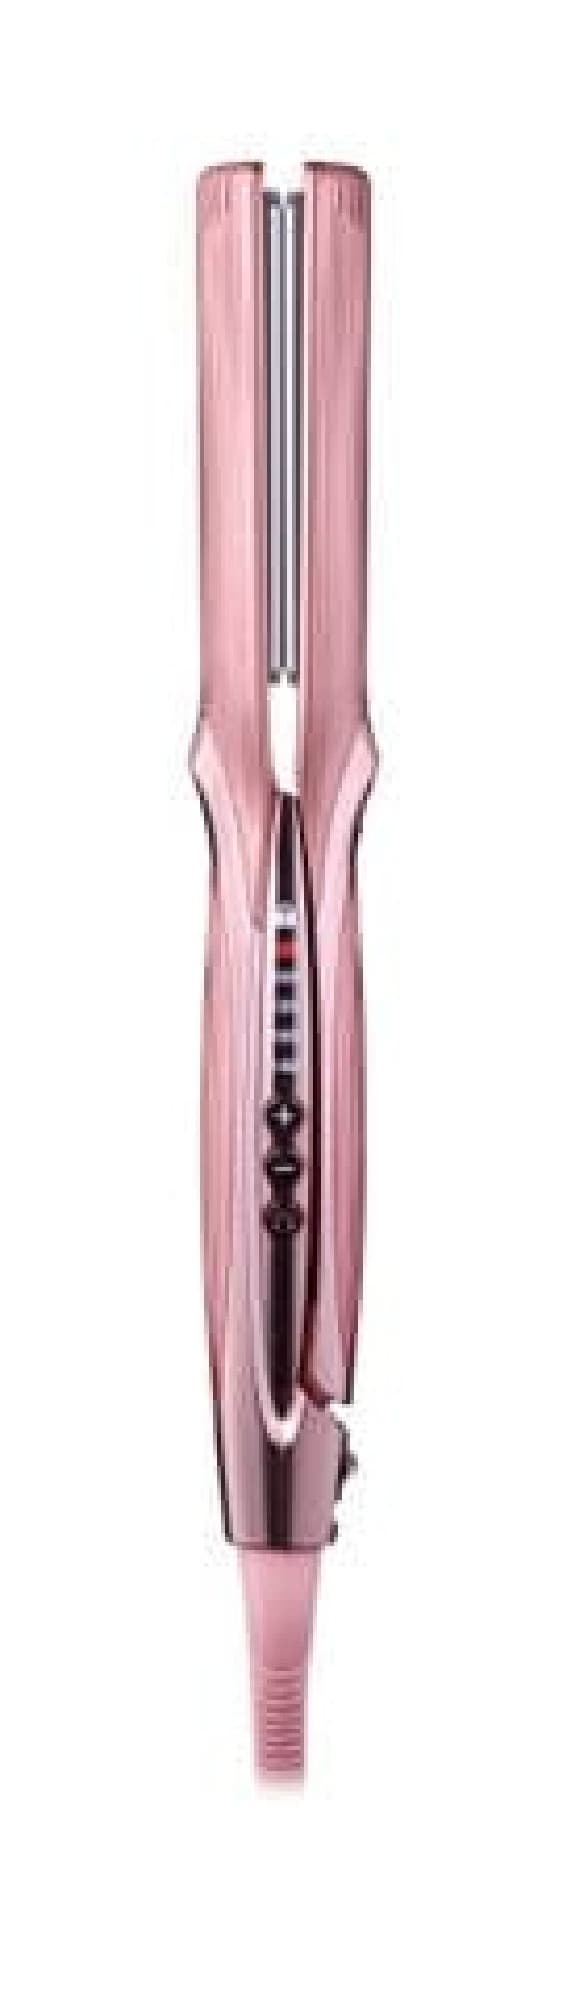 MTG's beauty brand "ReFa" will be releasing a new pink "ReFa STRAIGHT IRON PRO" on April 17th. Achieve salon-quality straight hair at home Image 3